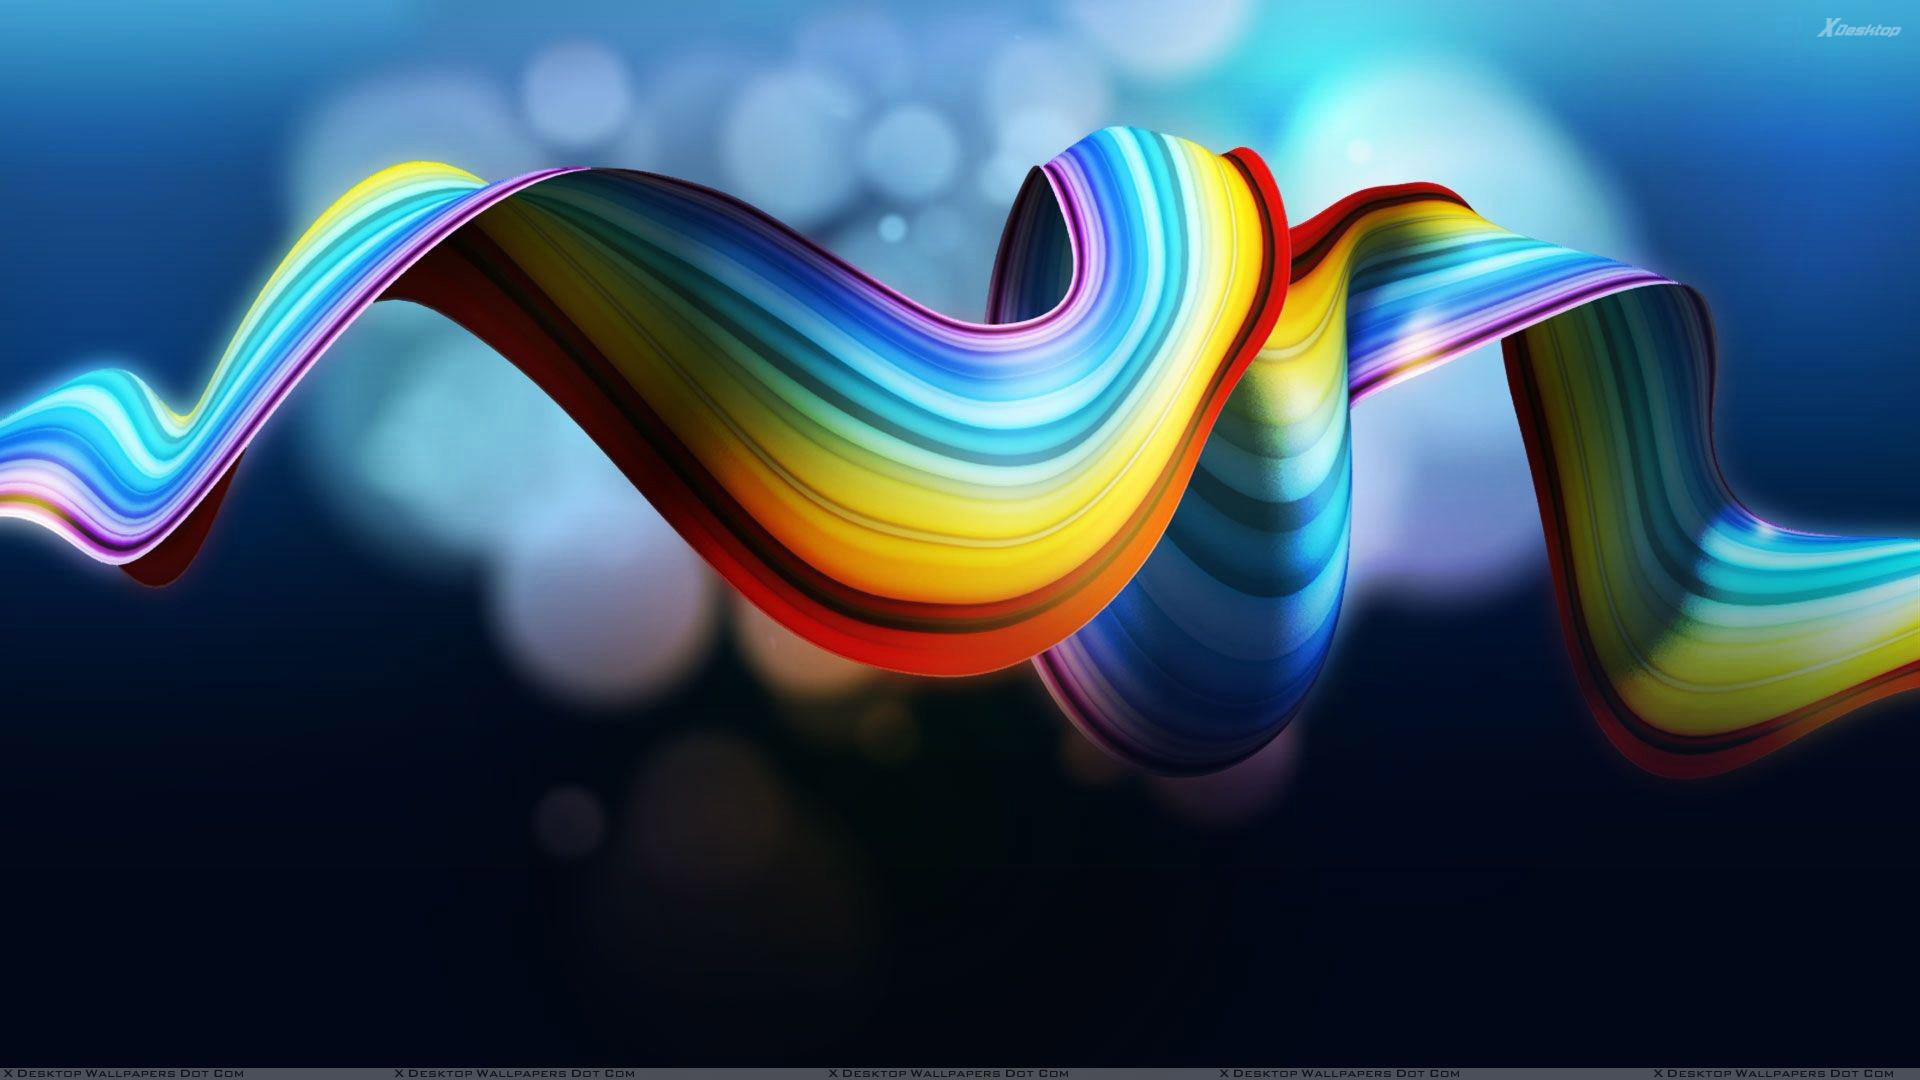 1920x1080 hd wallpaper rainbow abstract backgrounds 